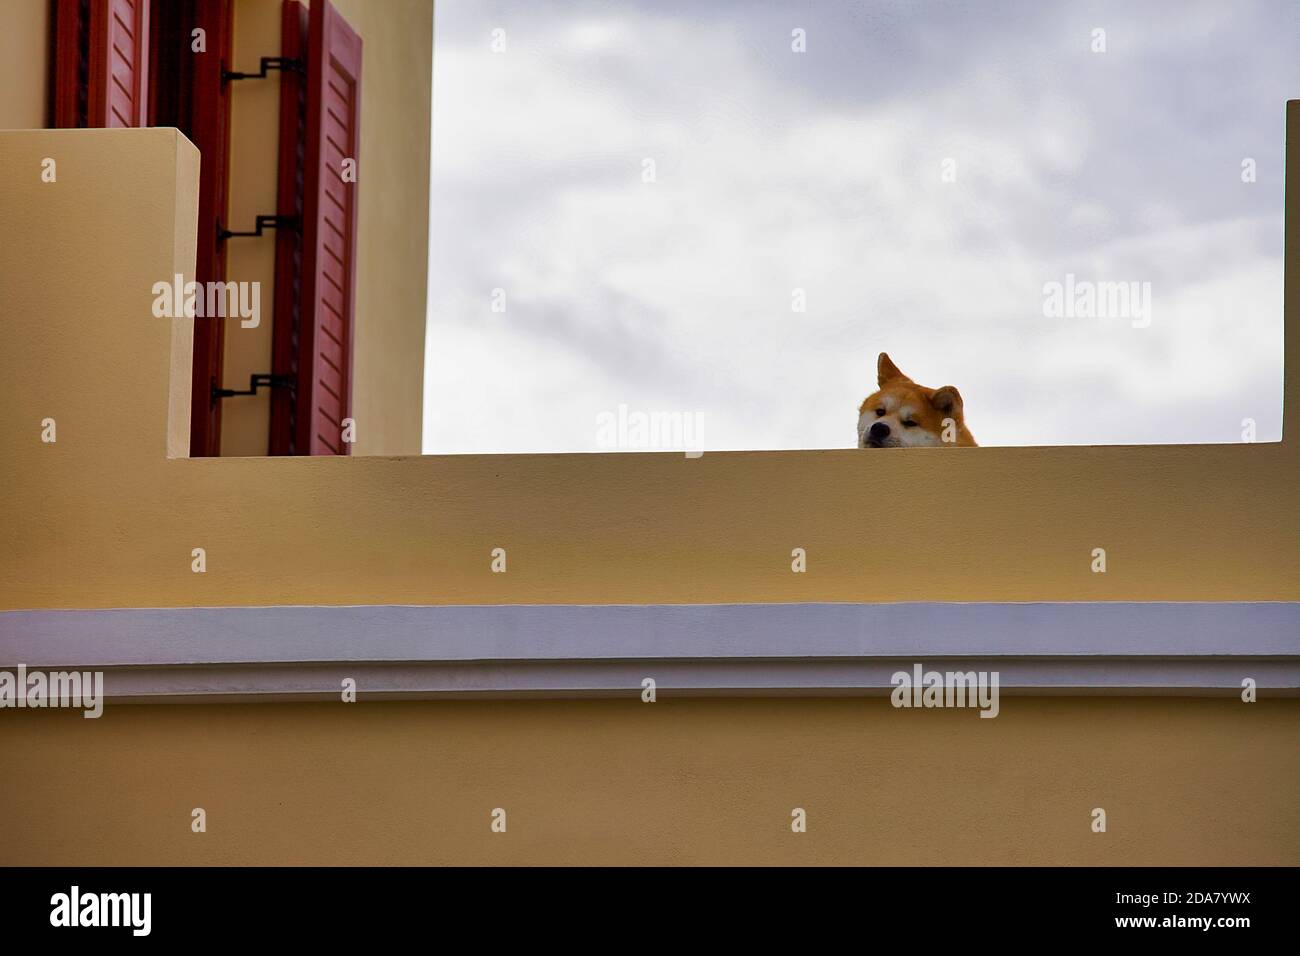 Akita Inu dog leaning his head and looking down from balcony wall. Stock Image. Stock Photo